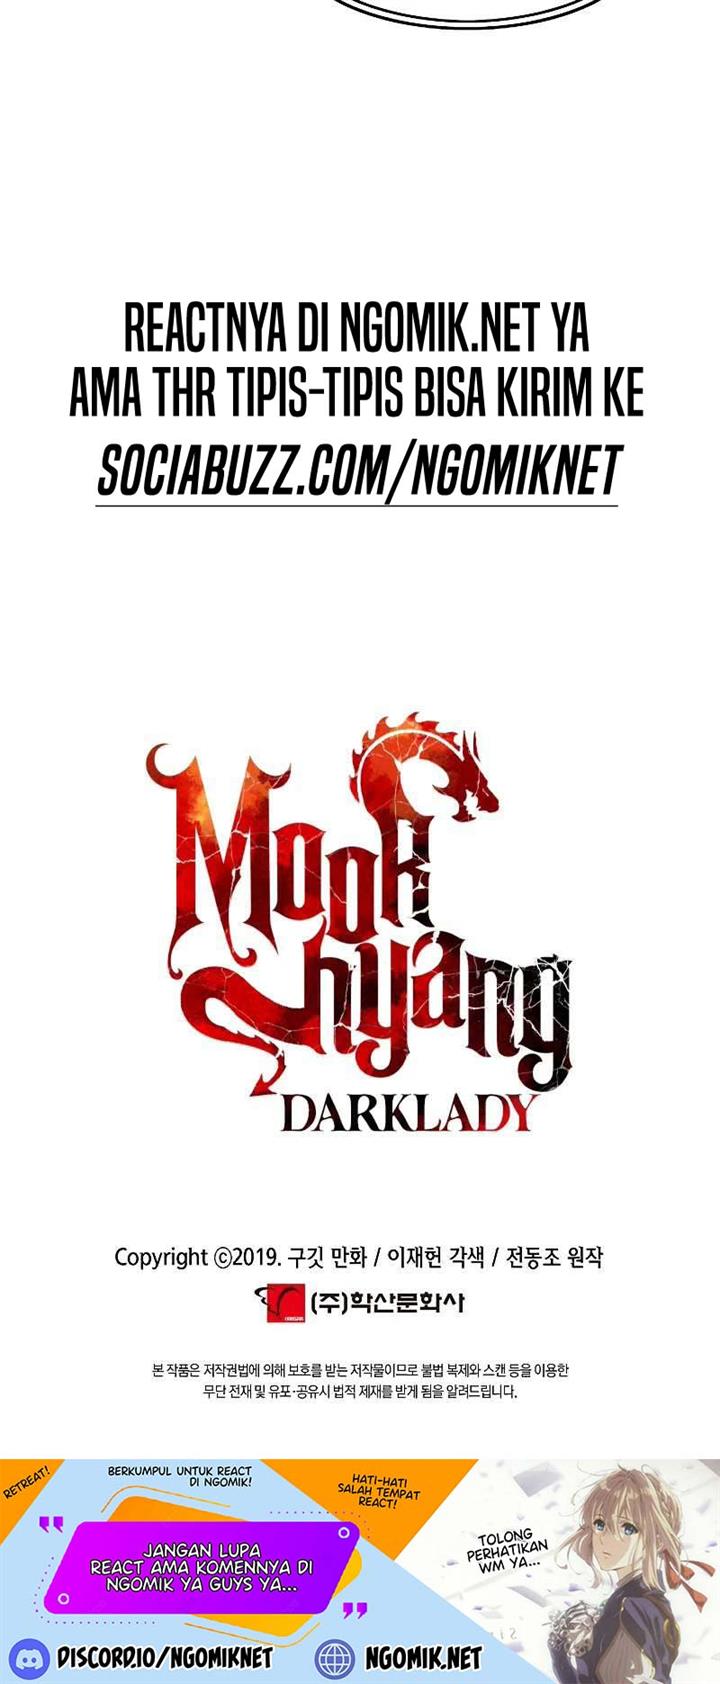 MookHyang – Dark Lady Chapter 156